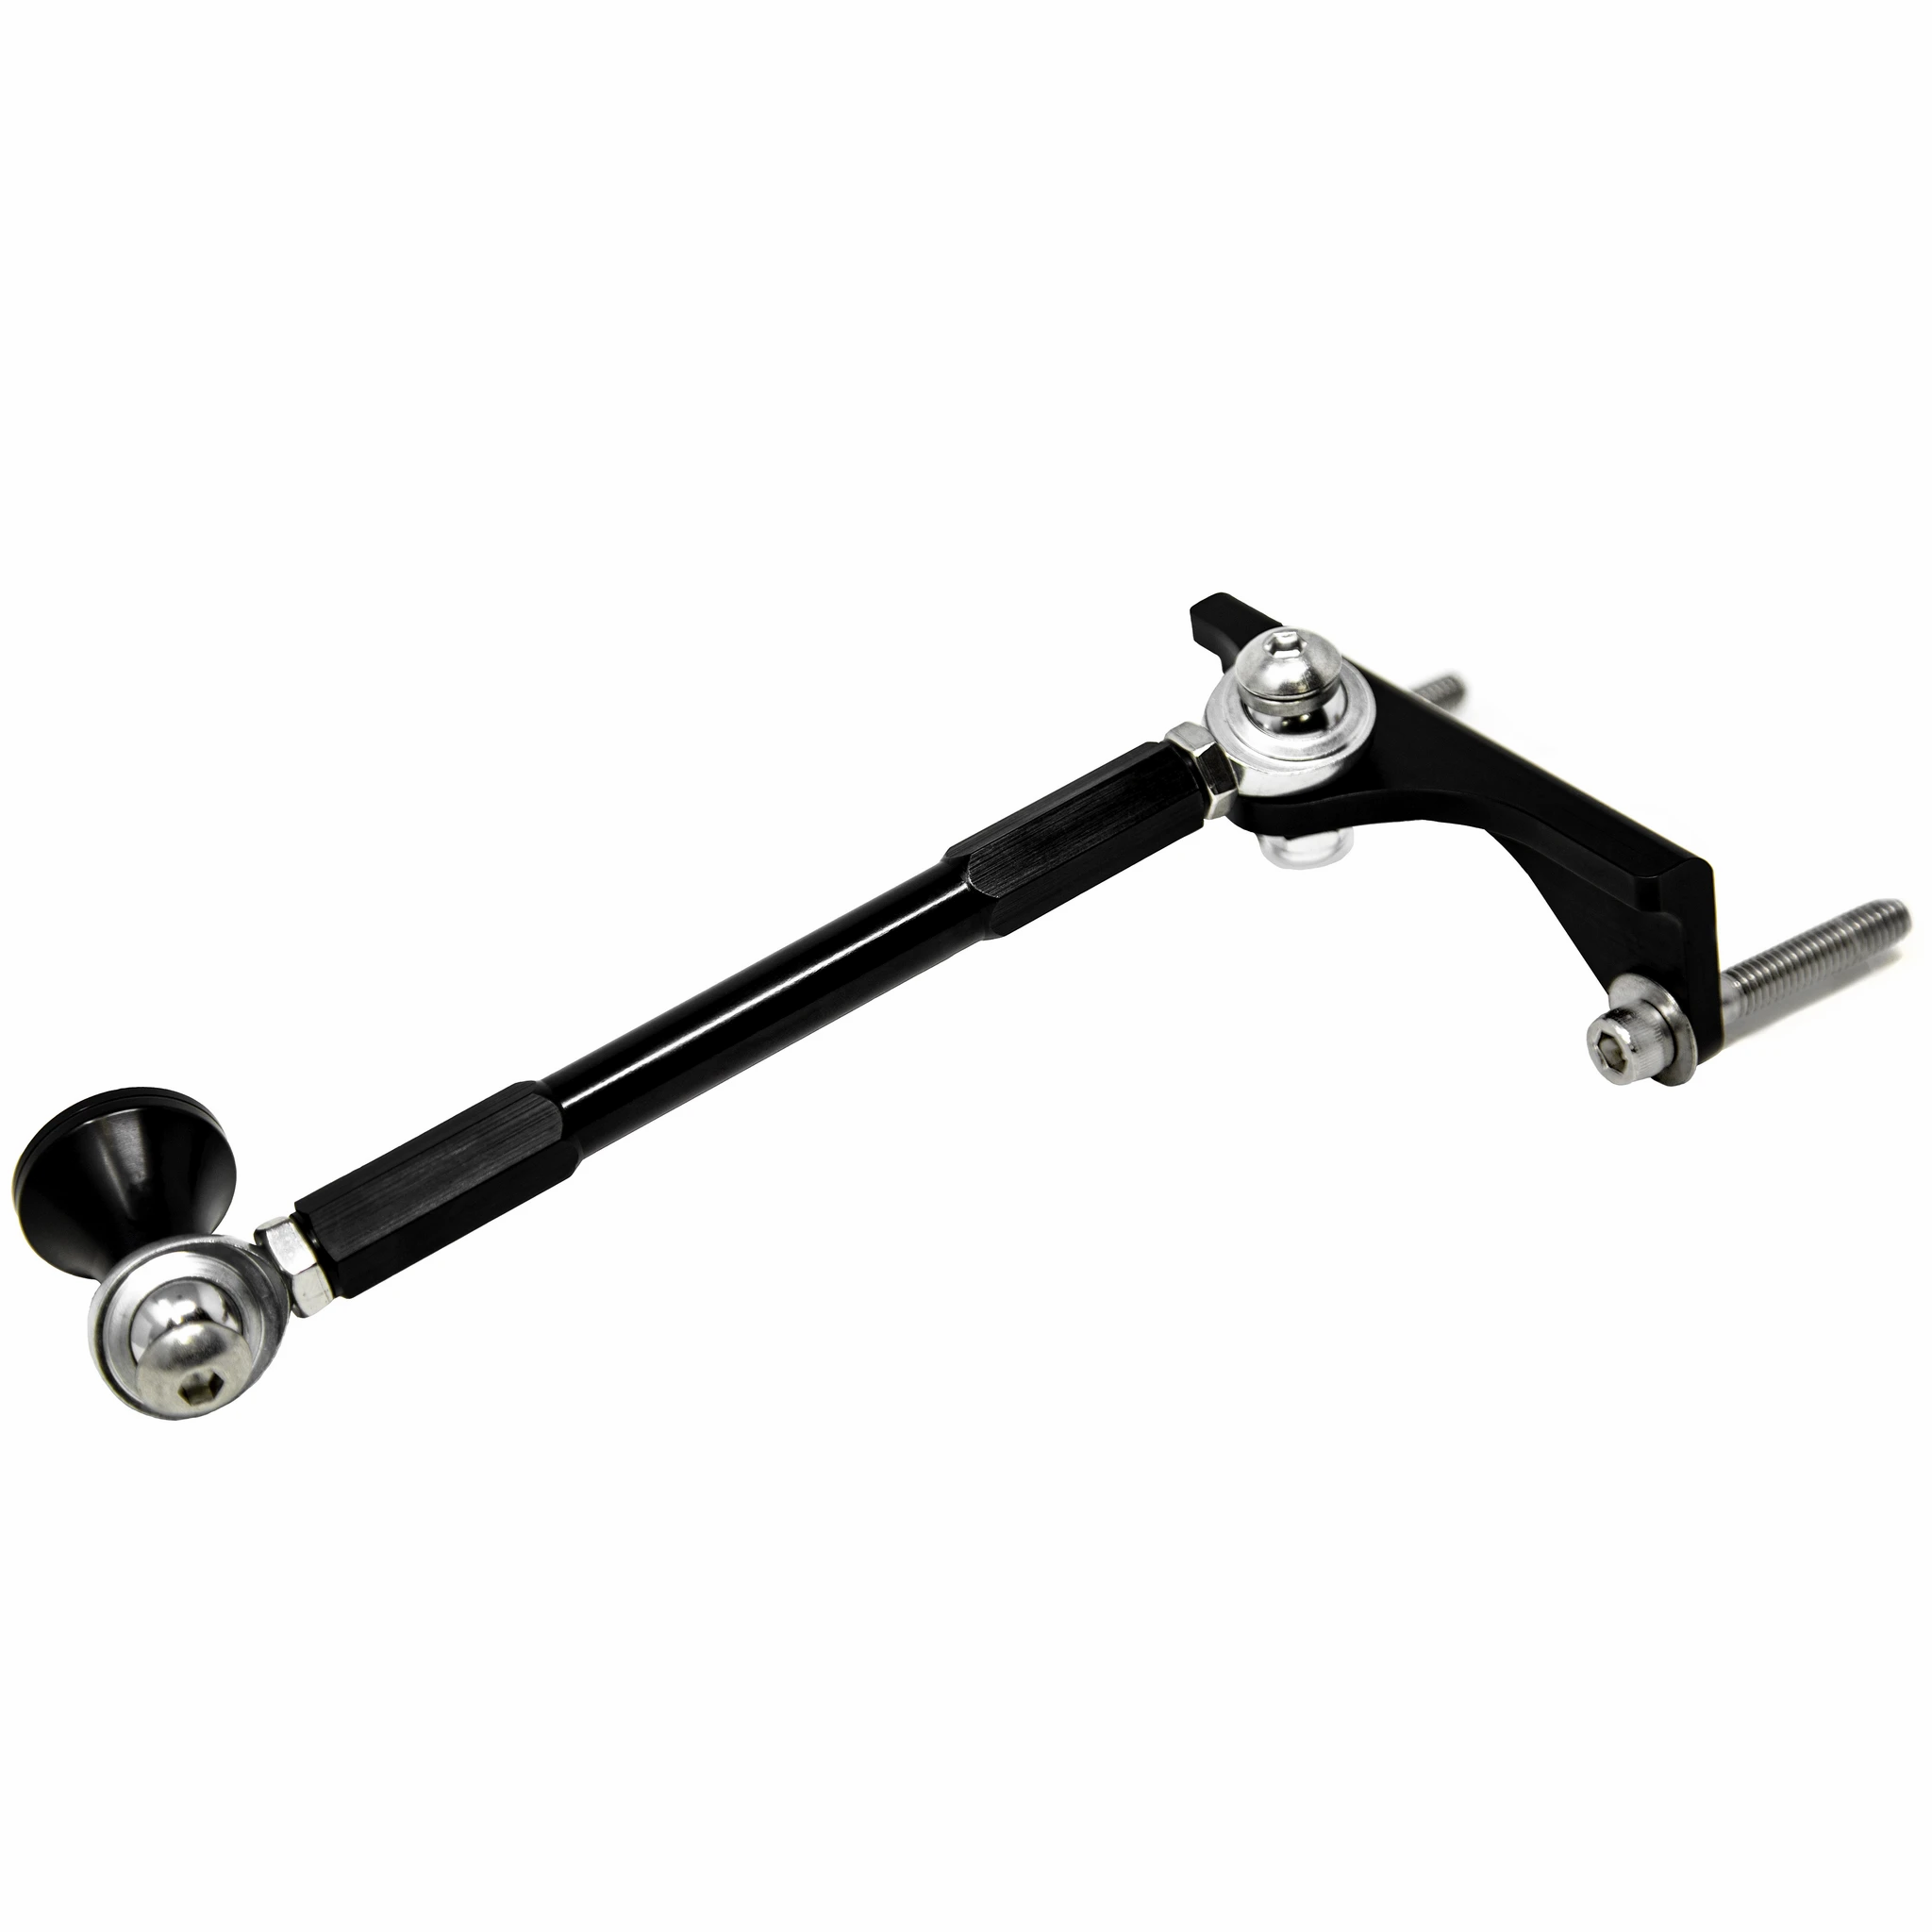 Alloy Art Touring Frame Stabilizer - 09 to 16